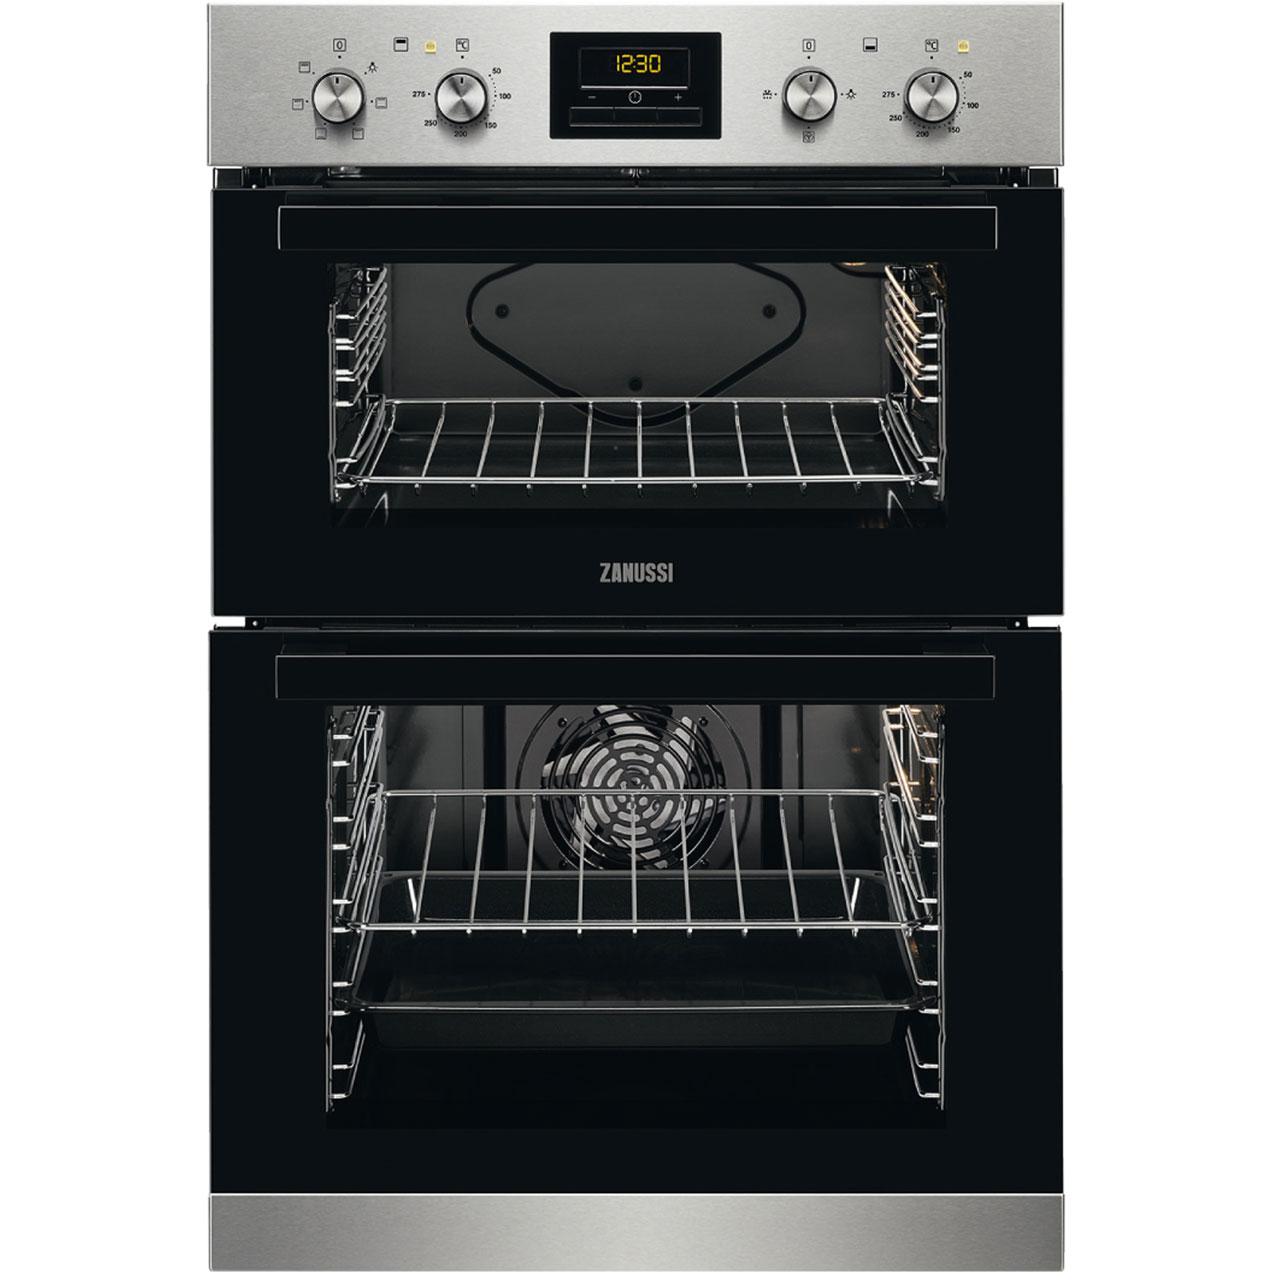 Zanussi ZOD35621XK Built In Double Oven Review